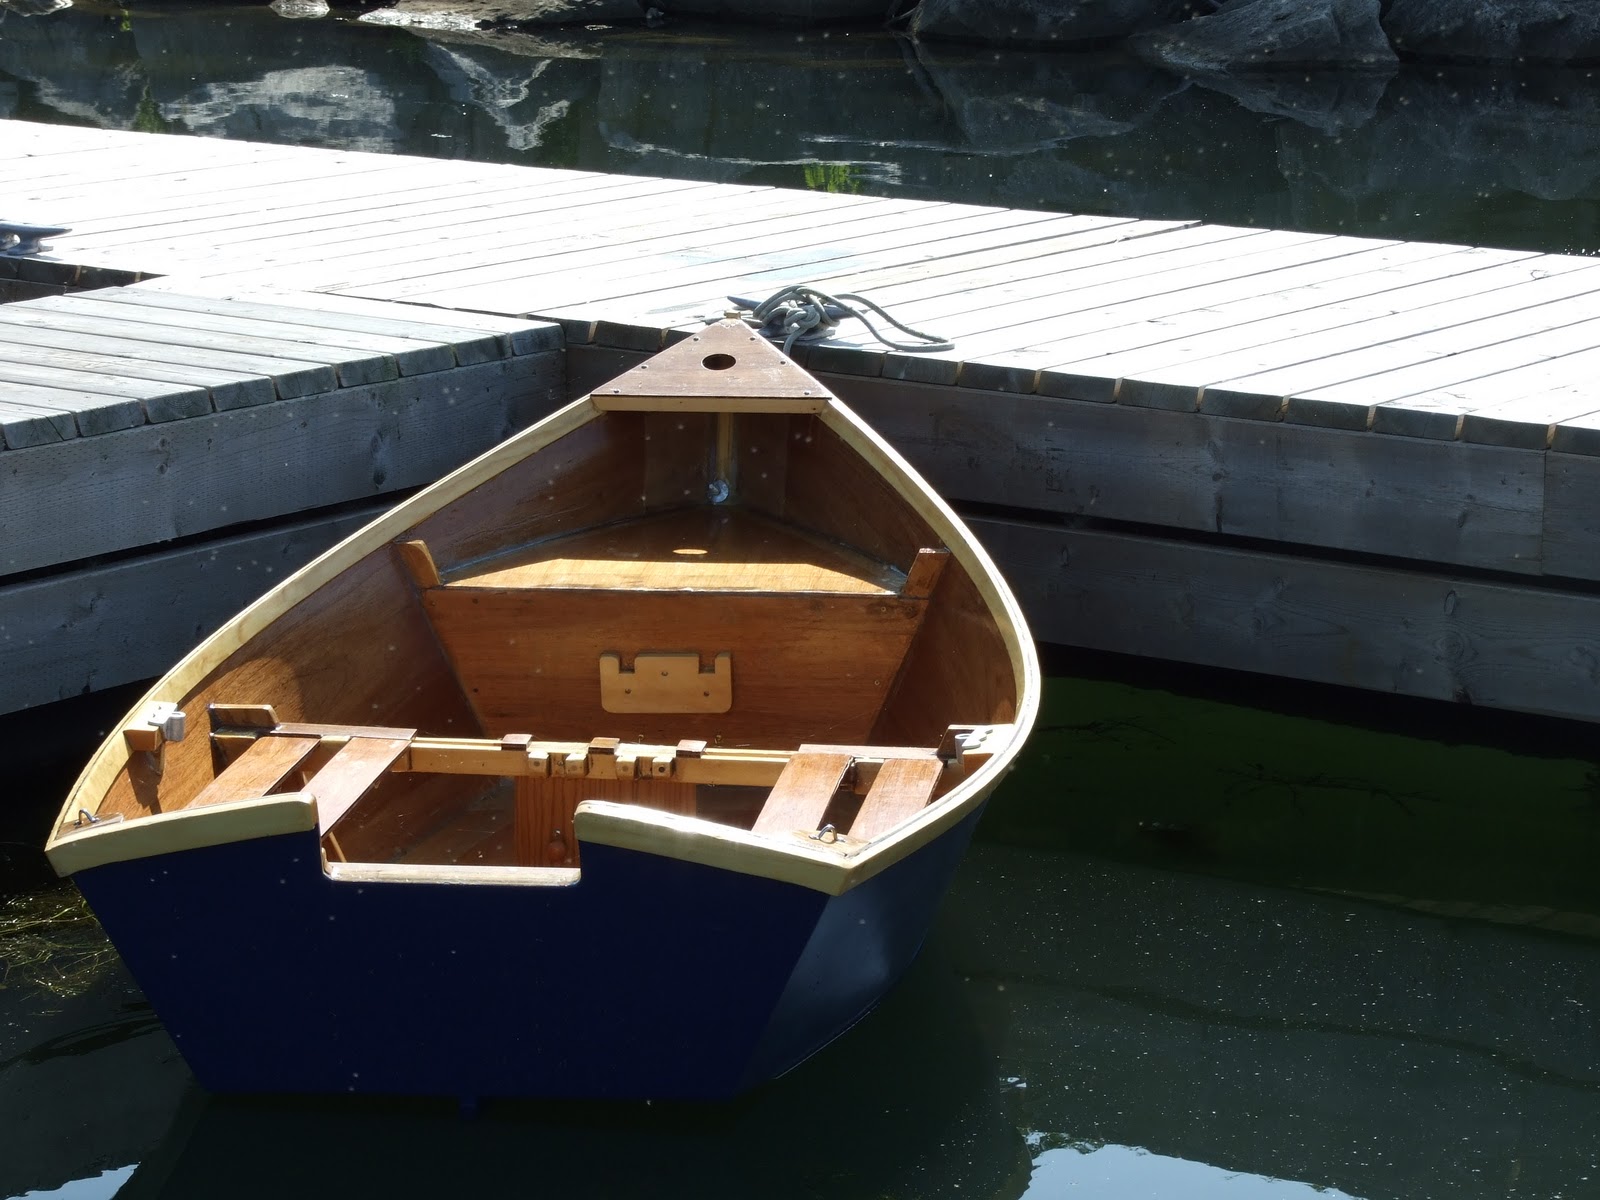 Building an epoxy dinghy – in 25 hours